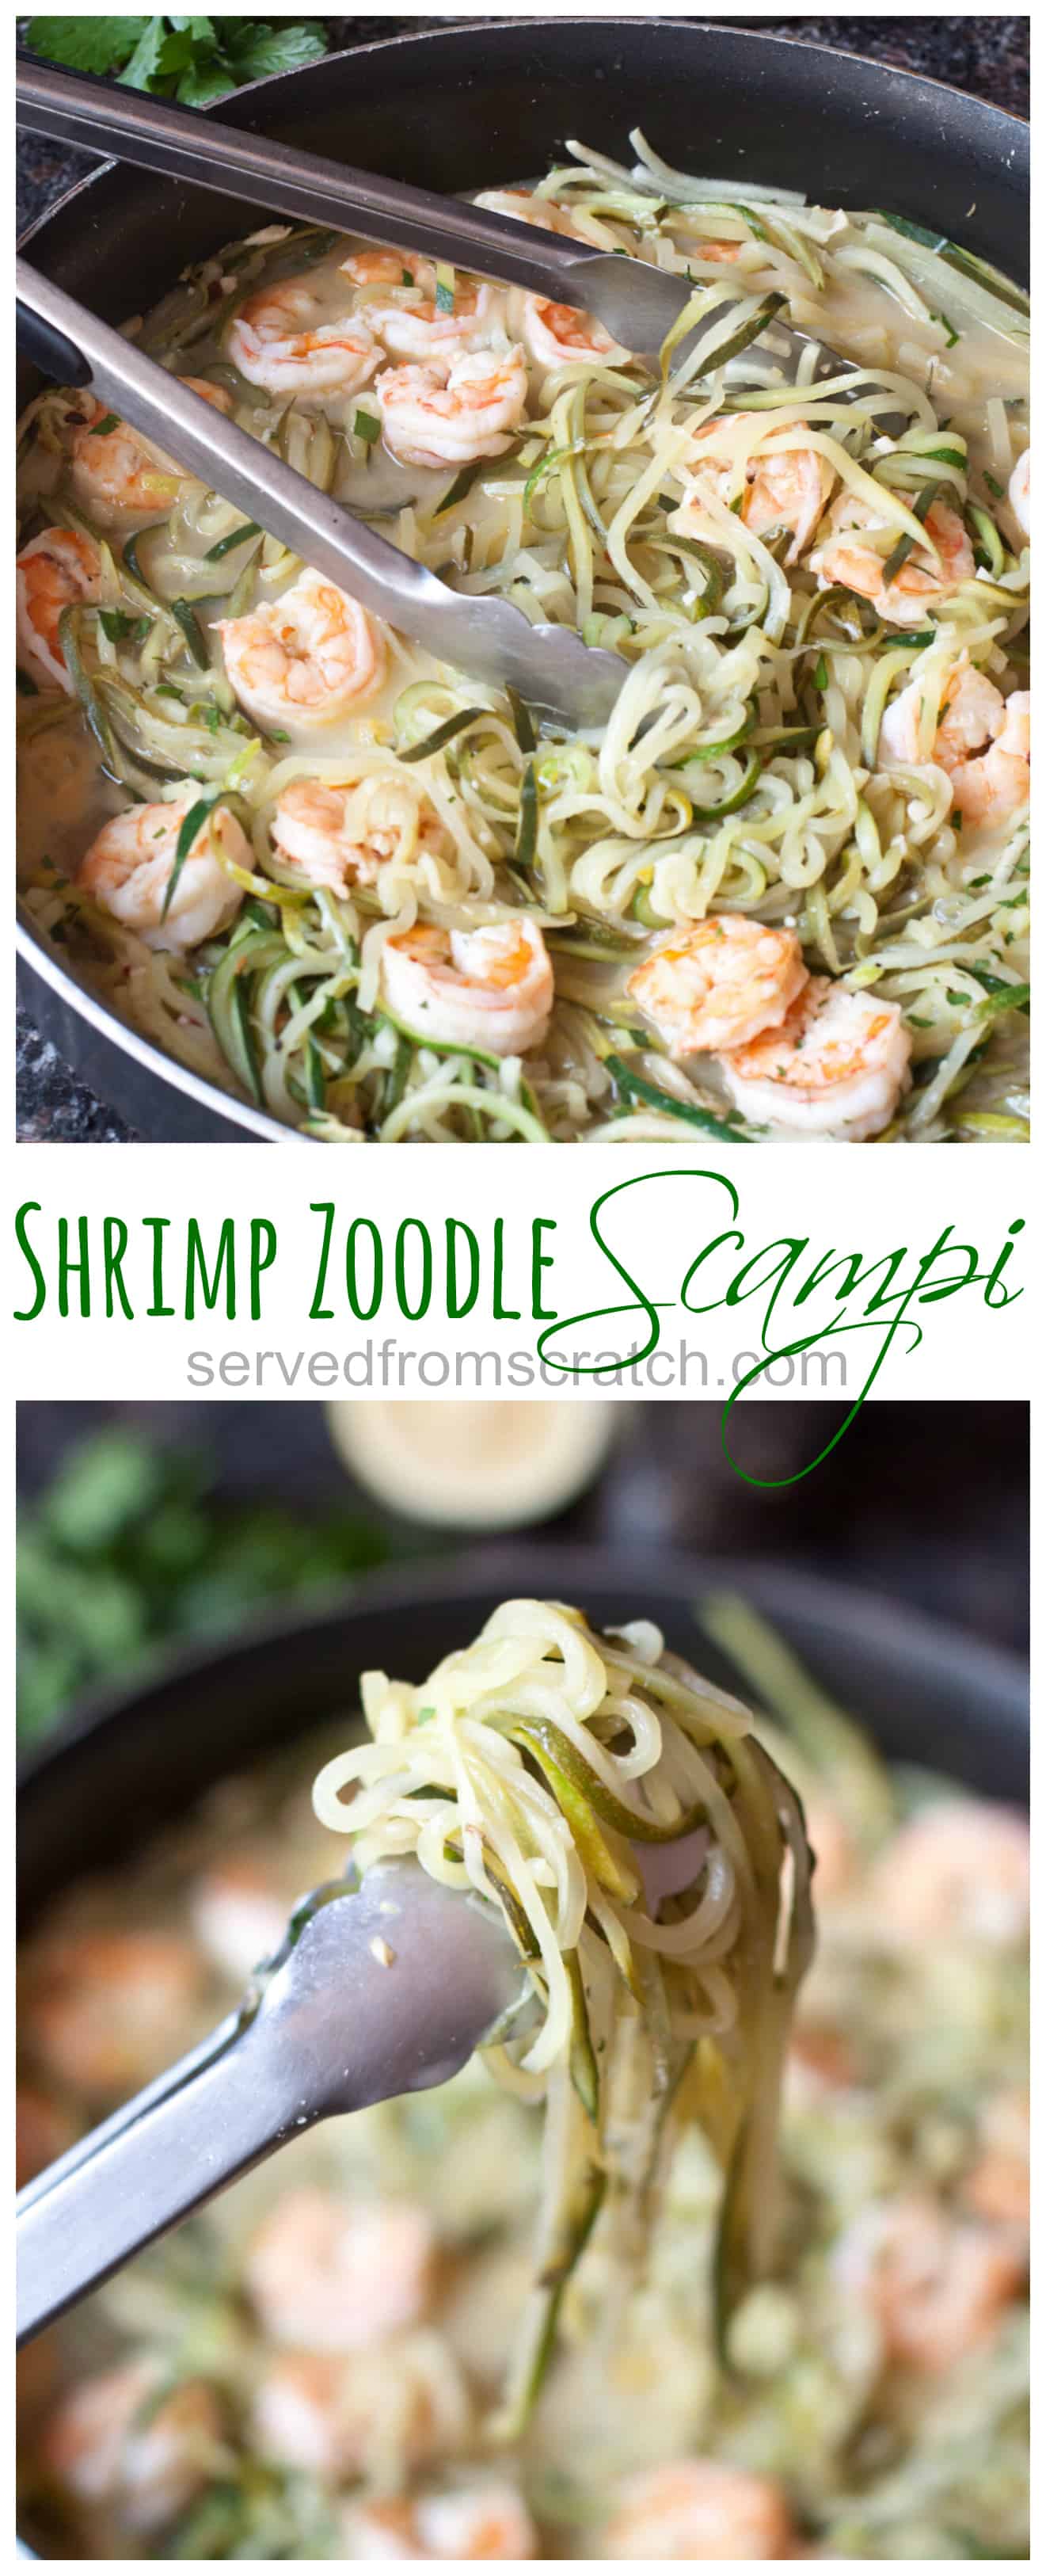 Shrimp Zoodle Scampi - Served From Scratch